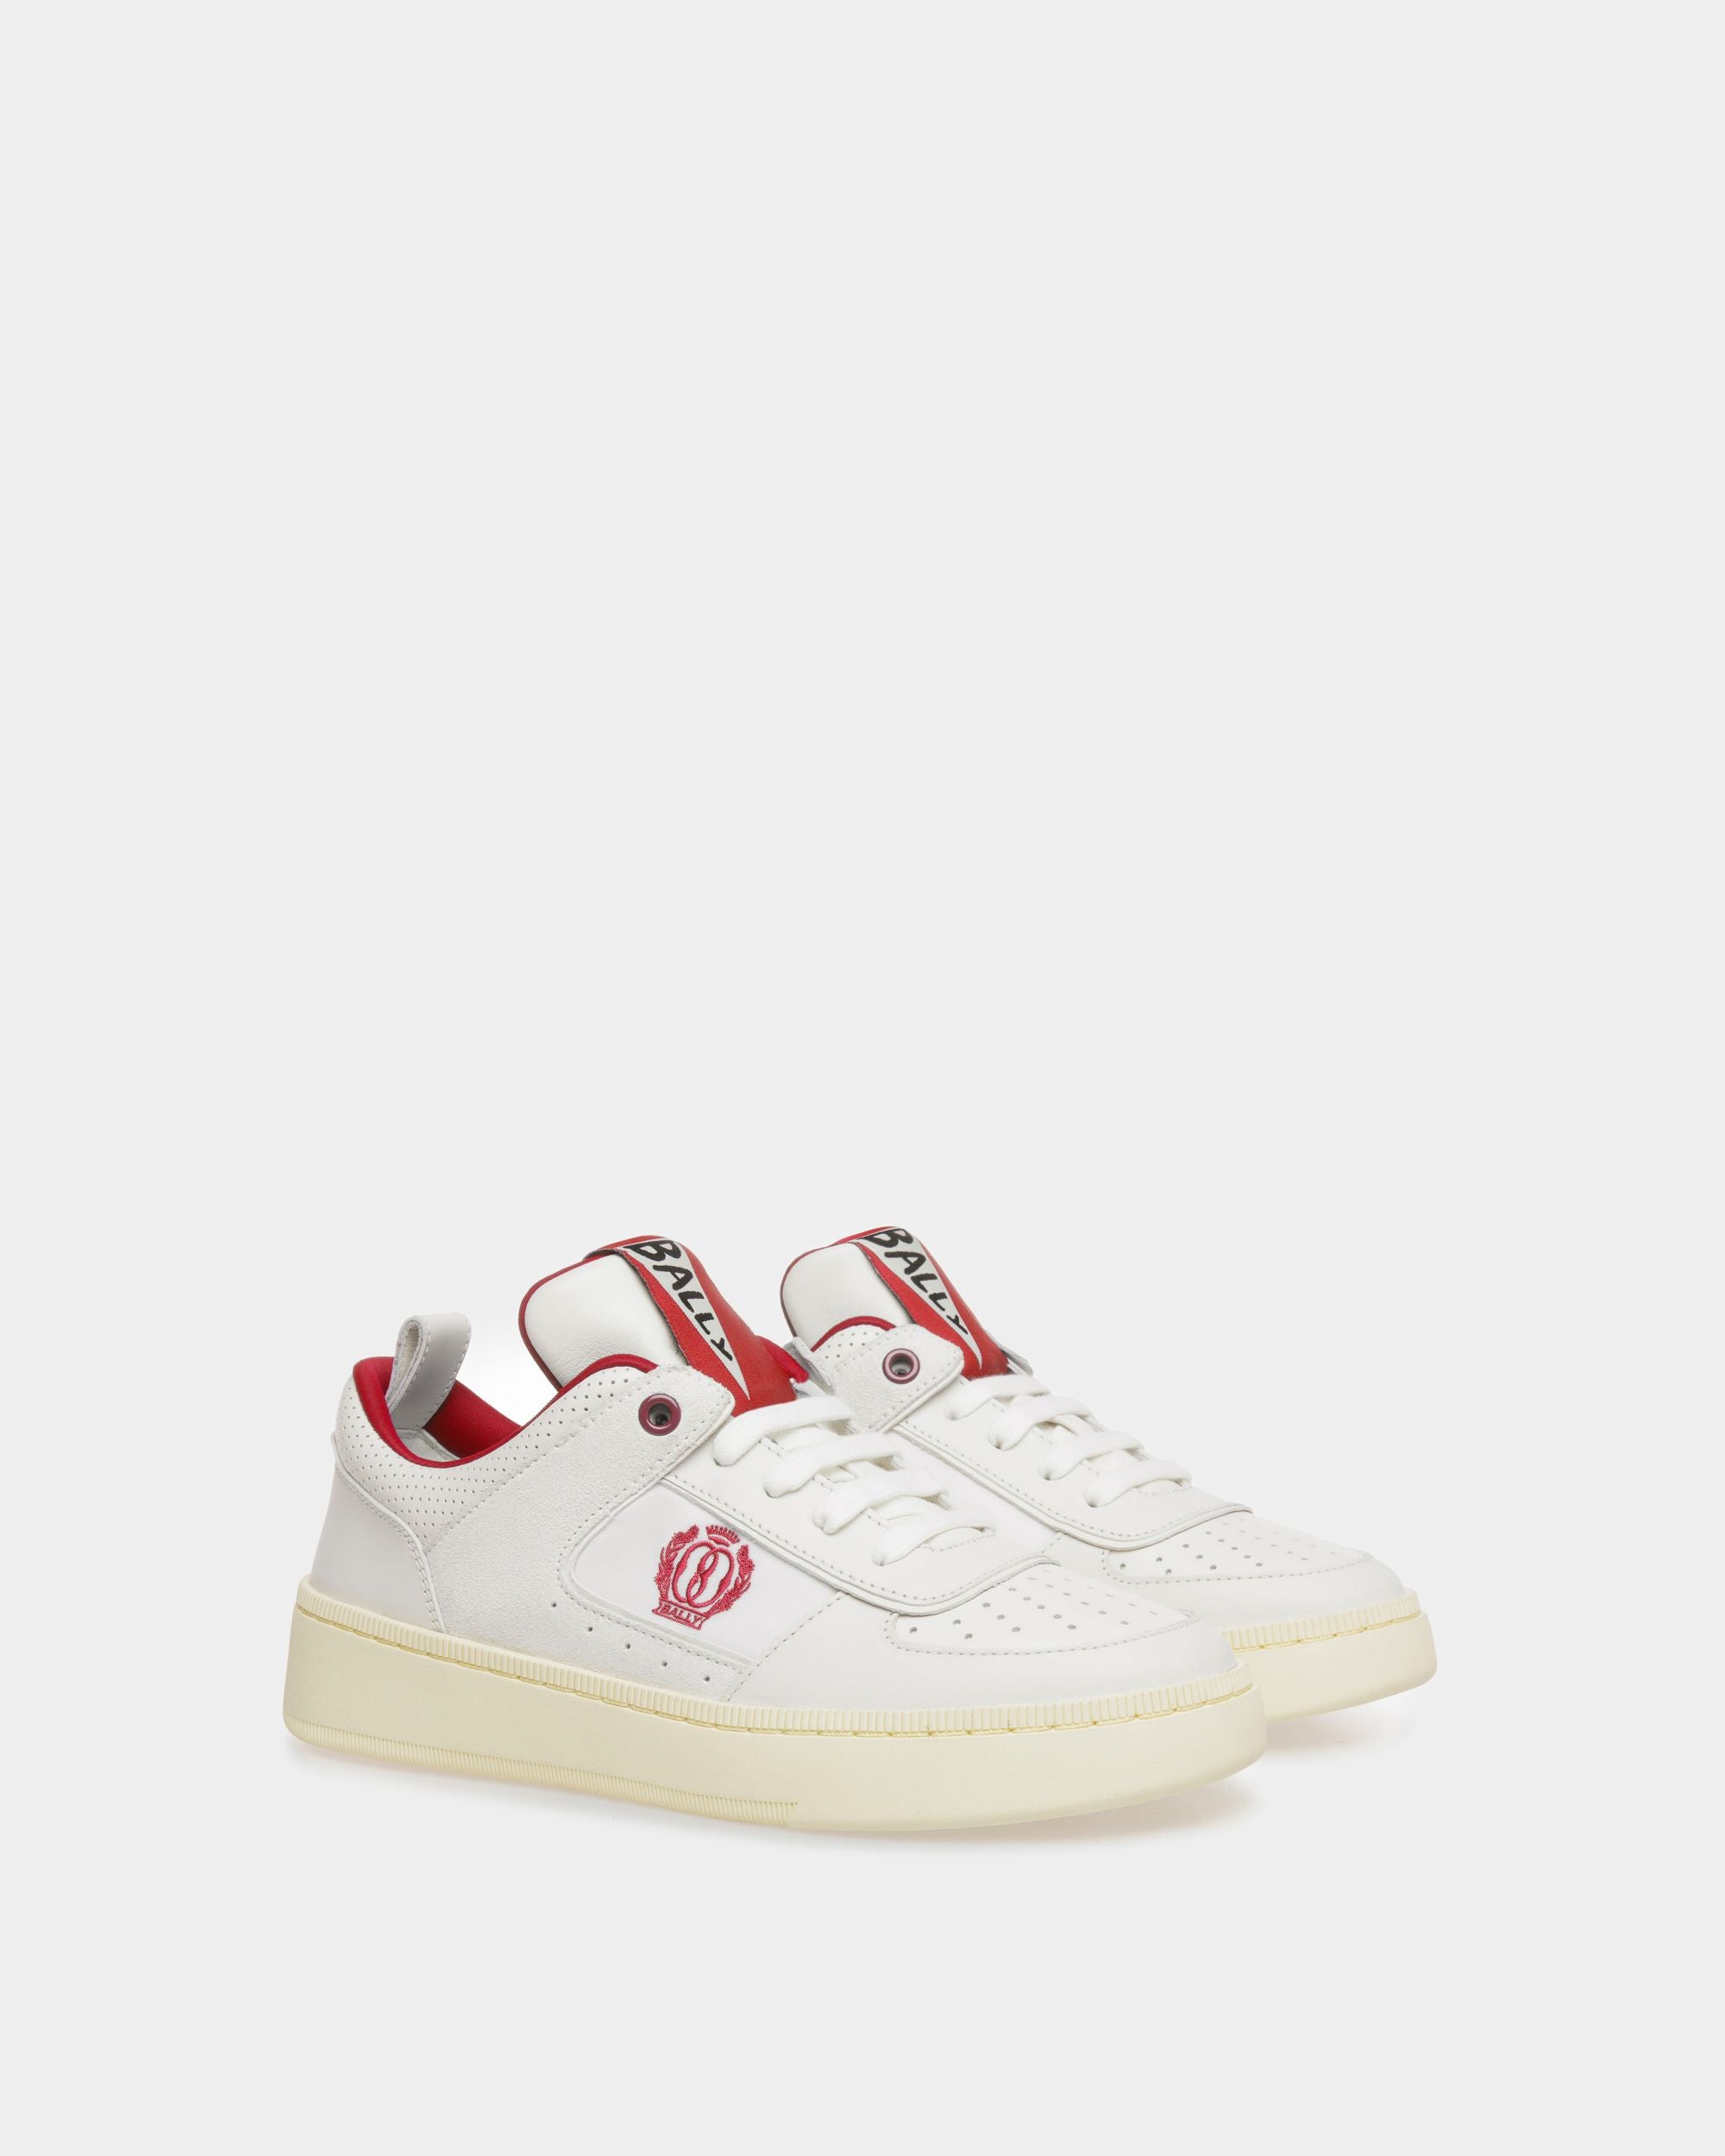 Riweira | Women's Sneakers | White And Red Leather | Bally | Still Life 3/4 Front